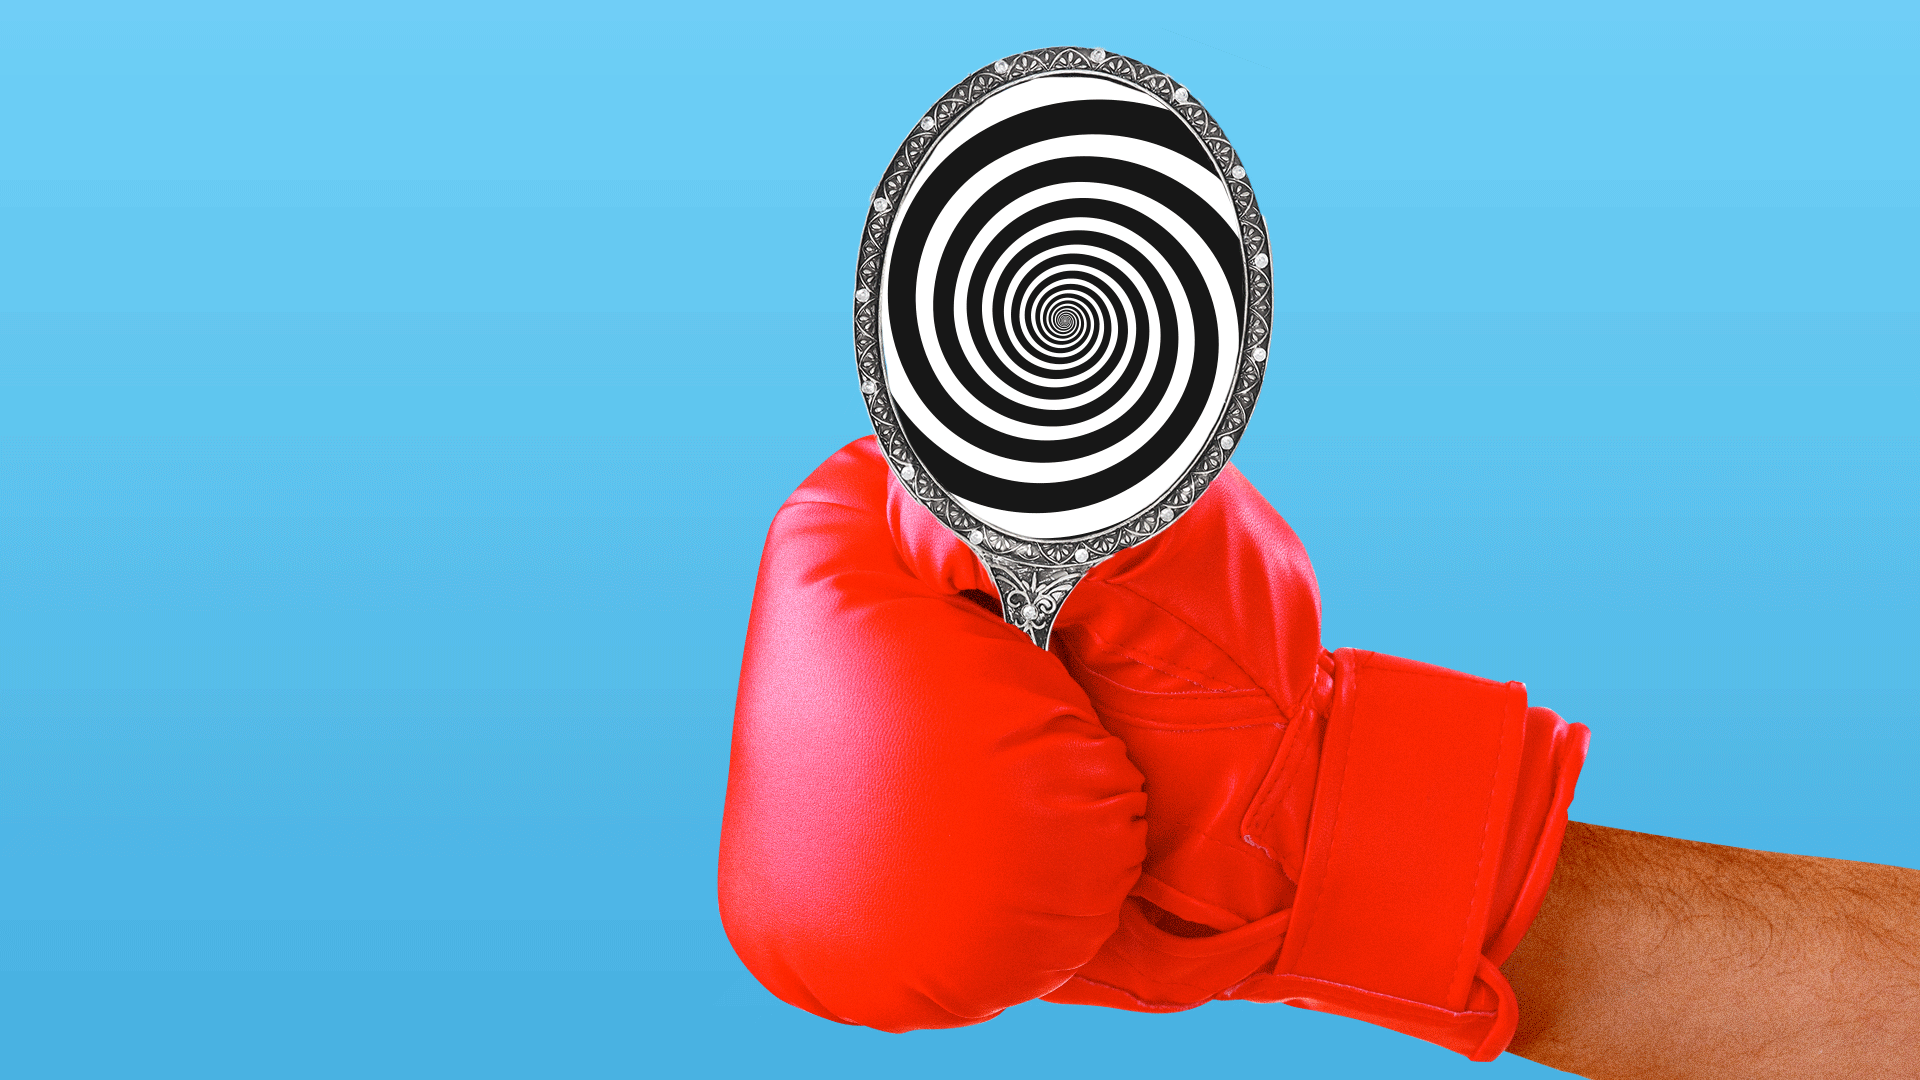 Animated illustration of a boxing gloved hand holding a mirror showing a swirling vortex